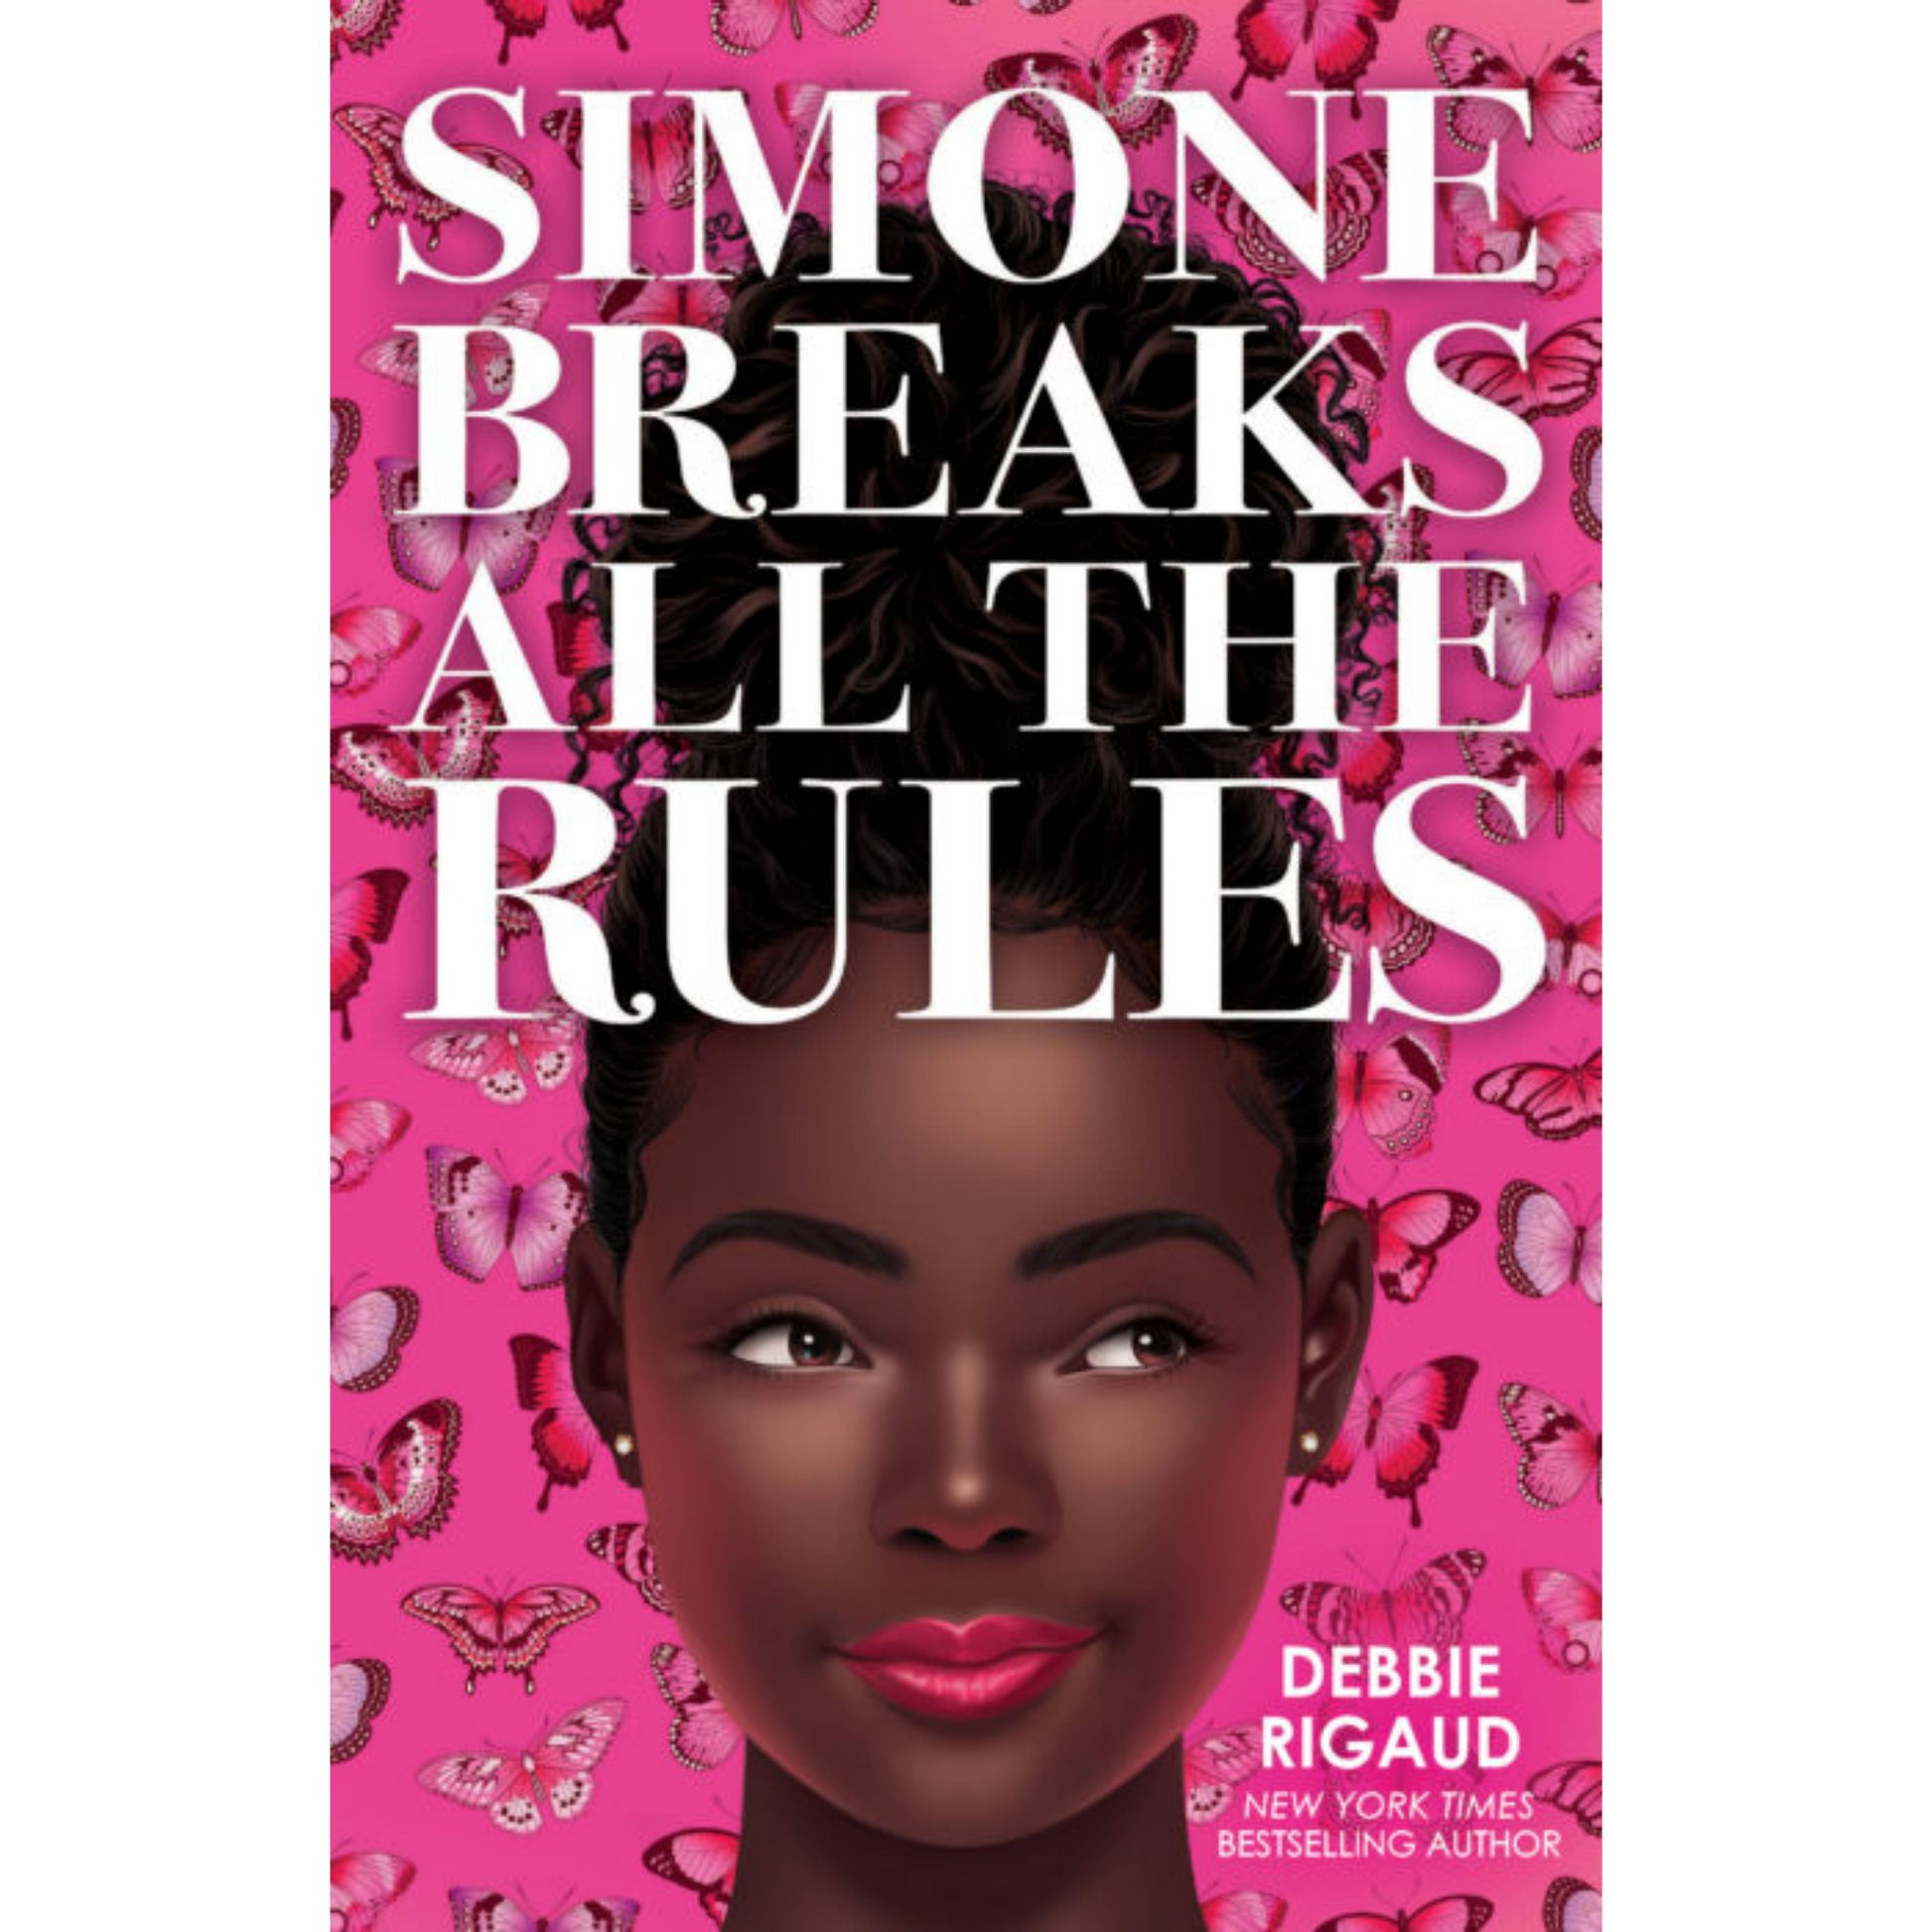 simone breaks all the rules debbie rigaud